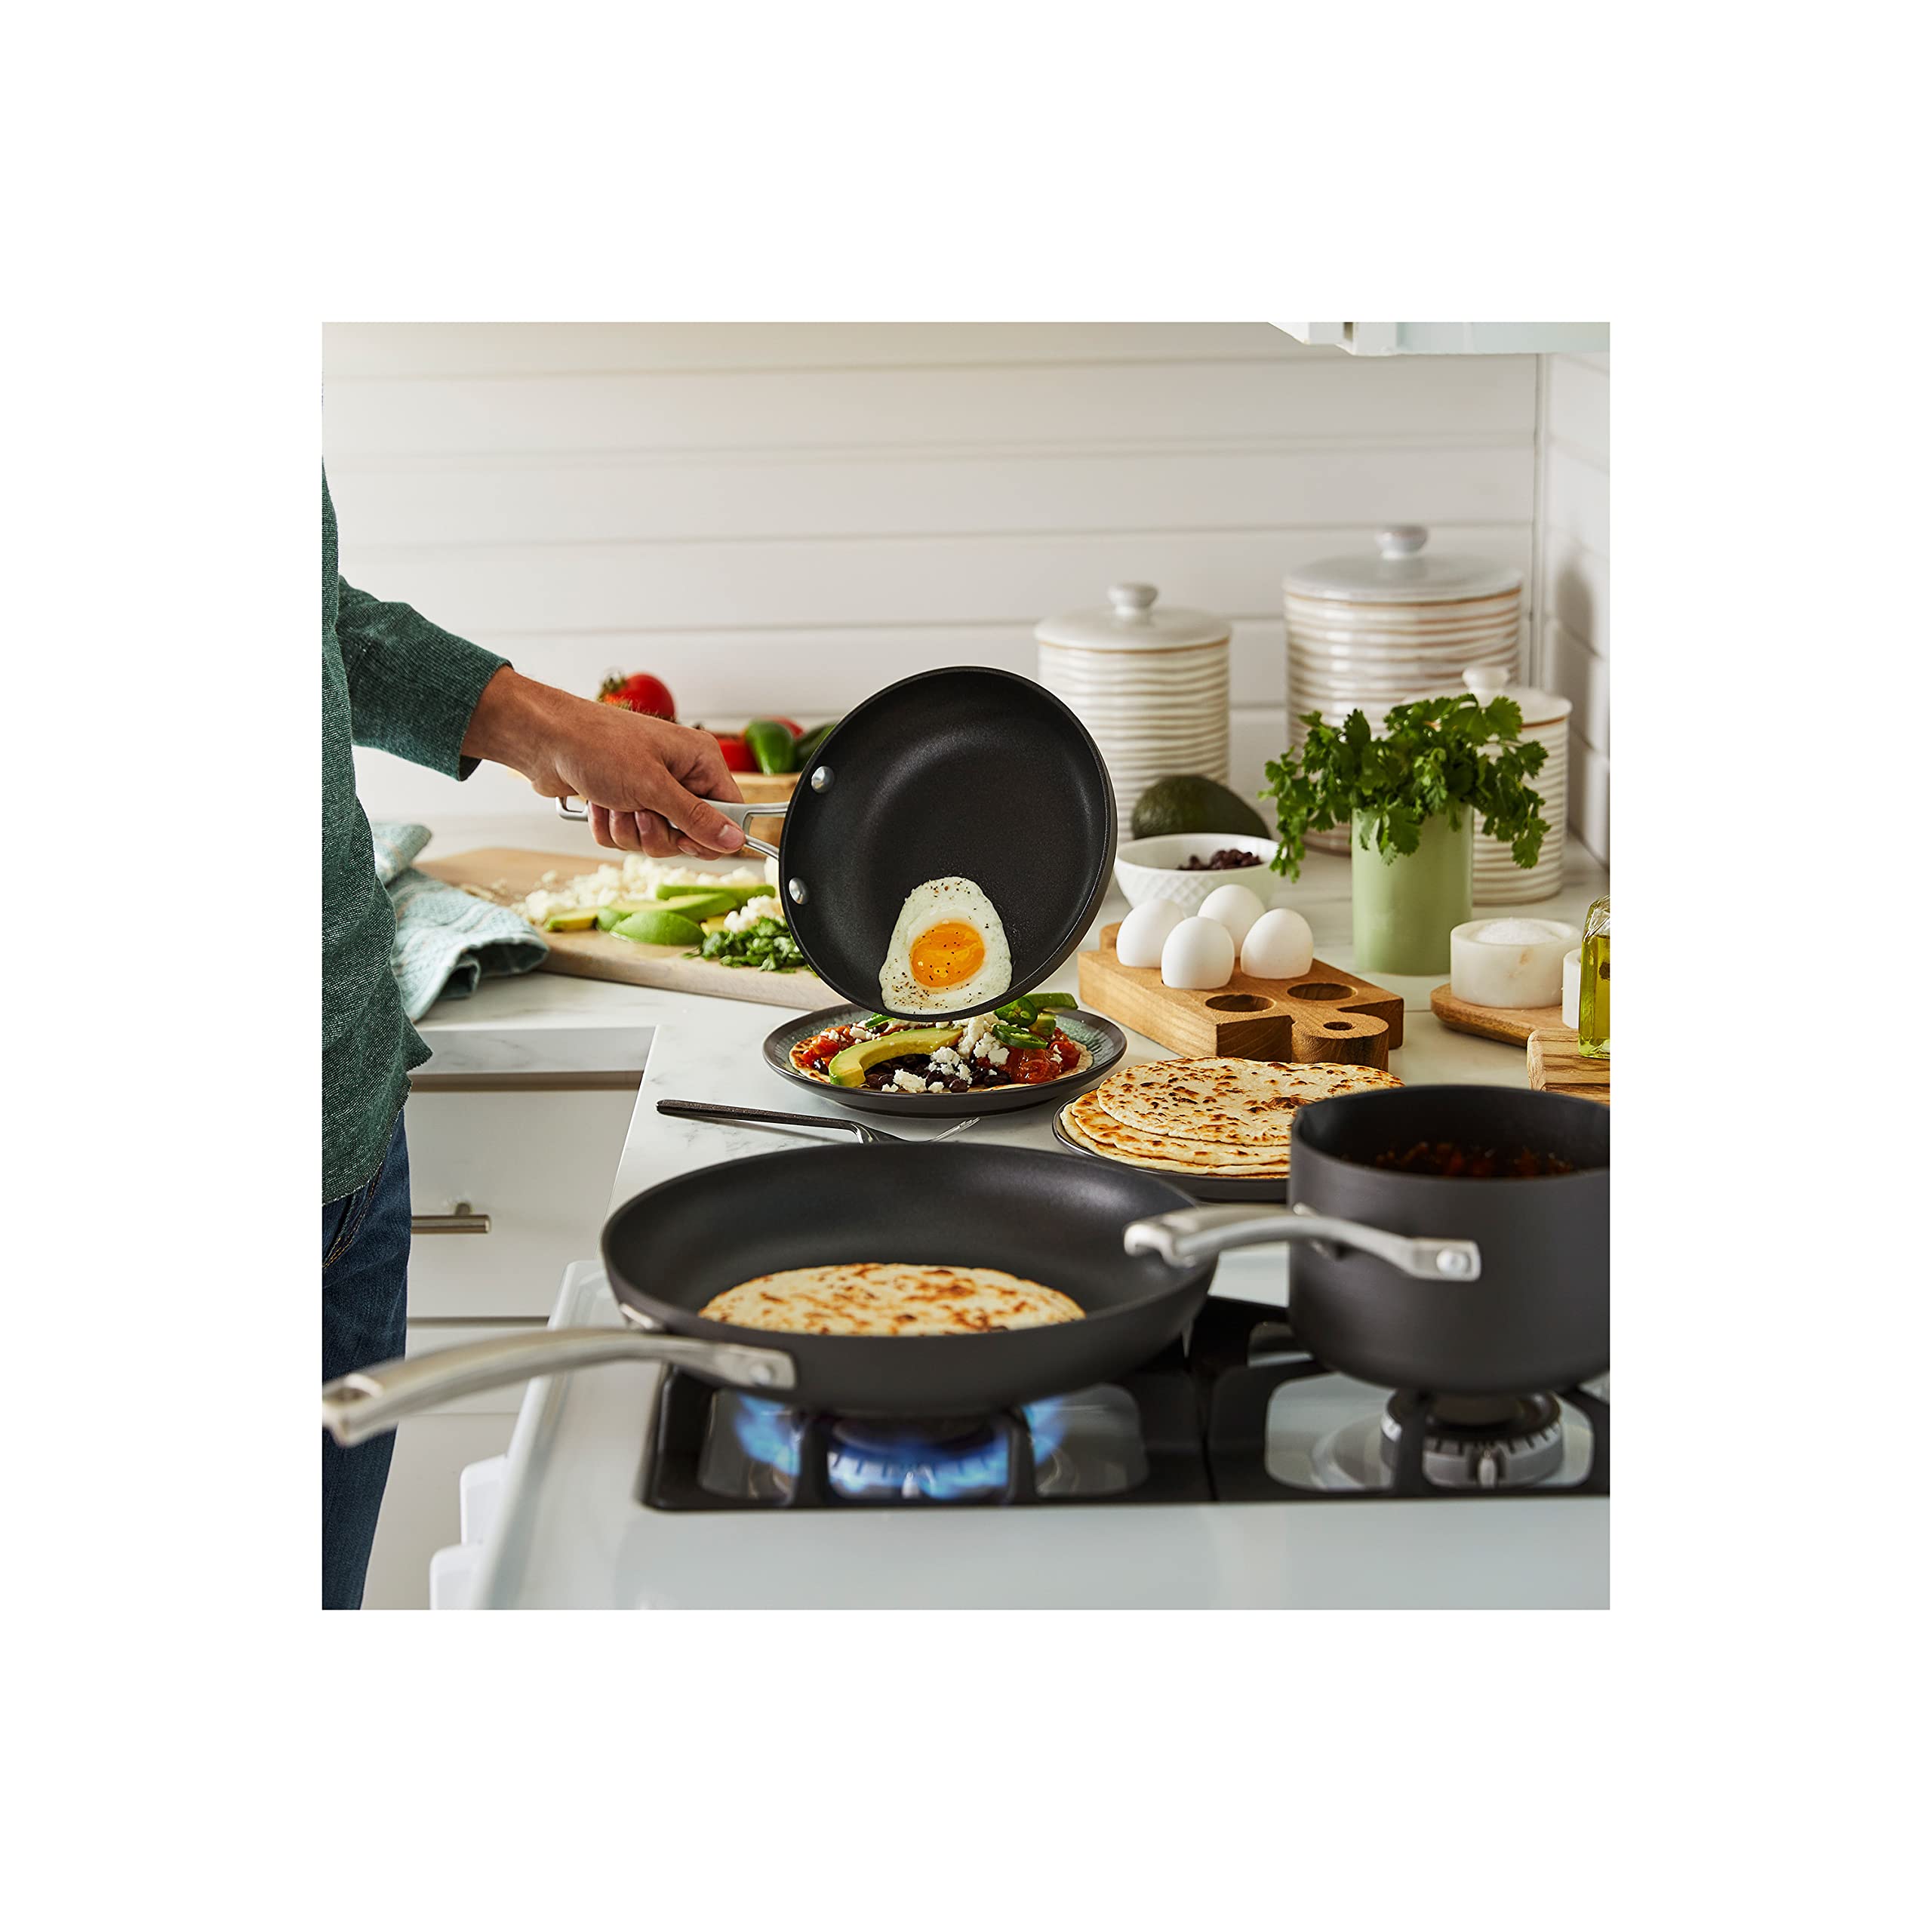 Calphalon Classic Hard-Anodized Nonstick Frying Pan Set, 8-Inch and 10-Inch Frying Pans